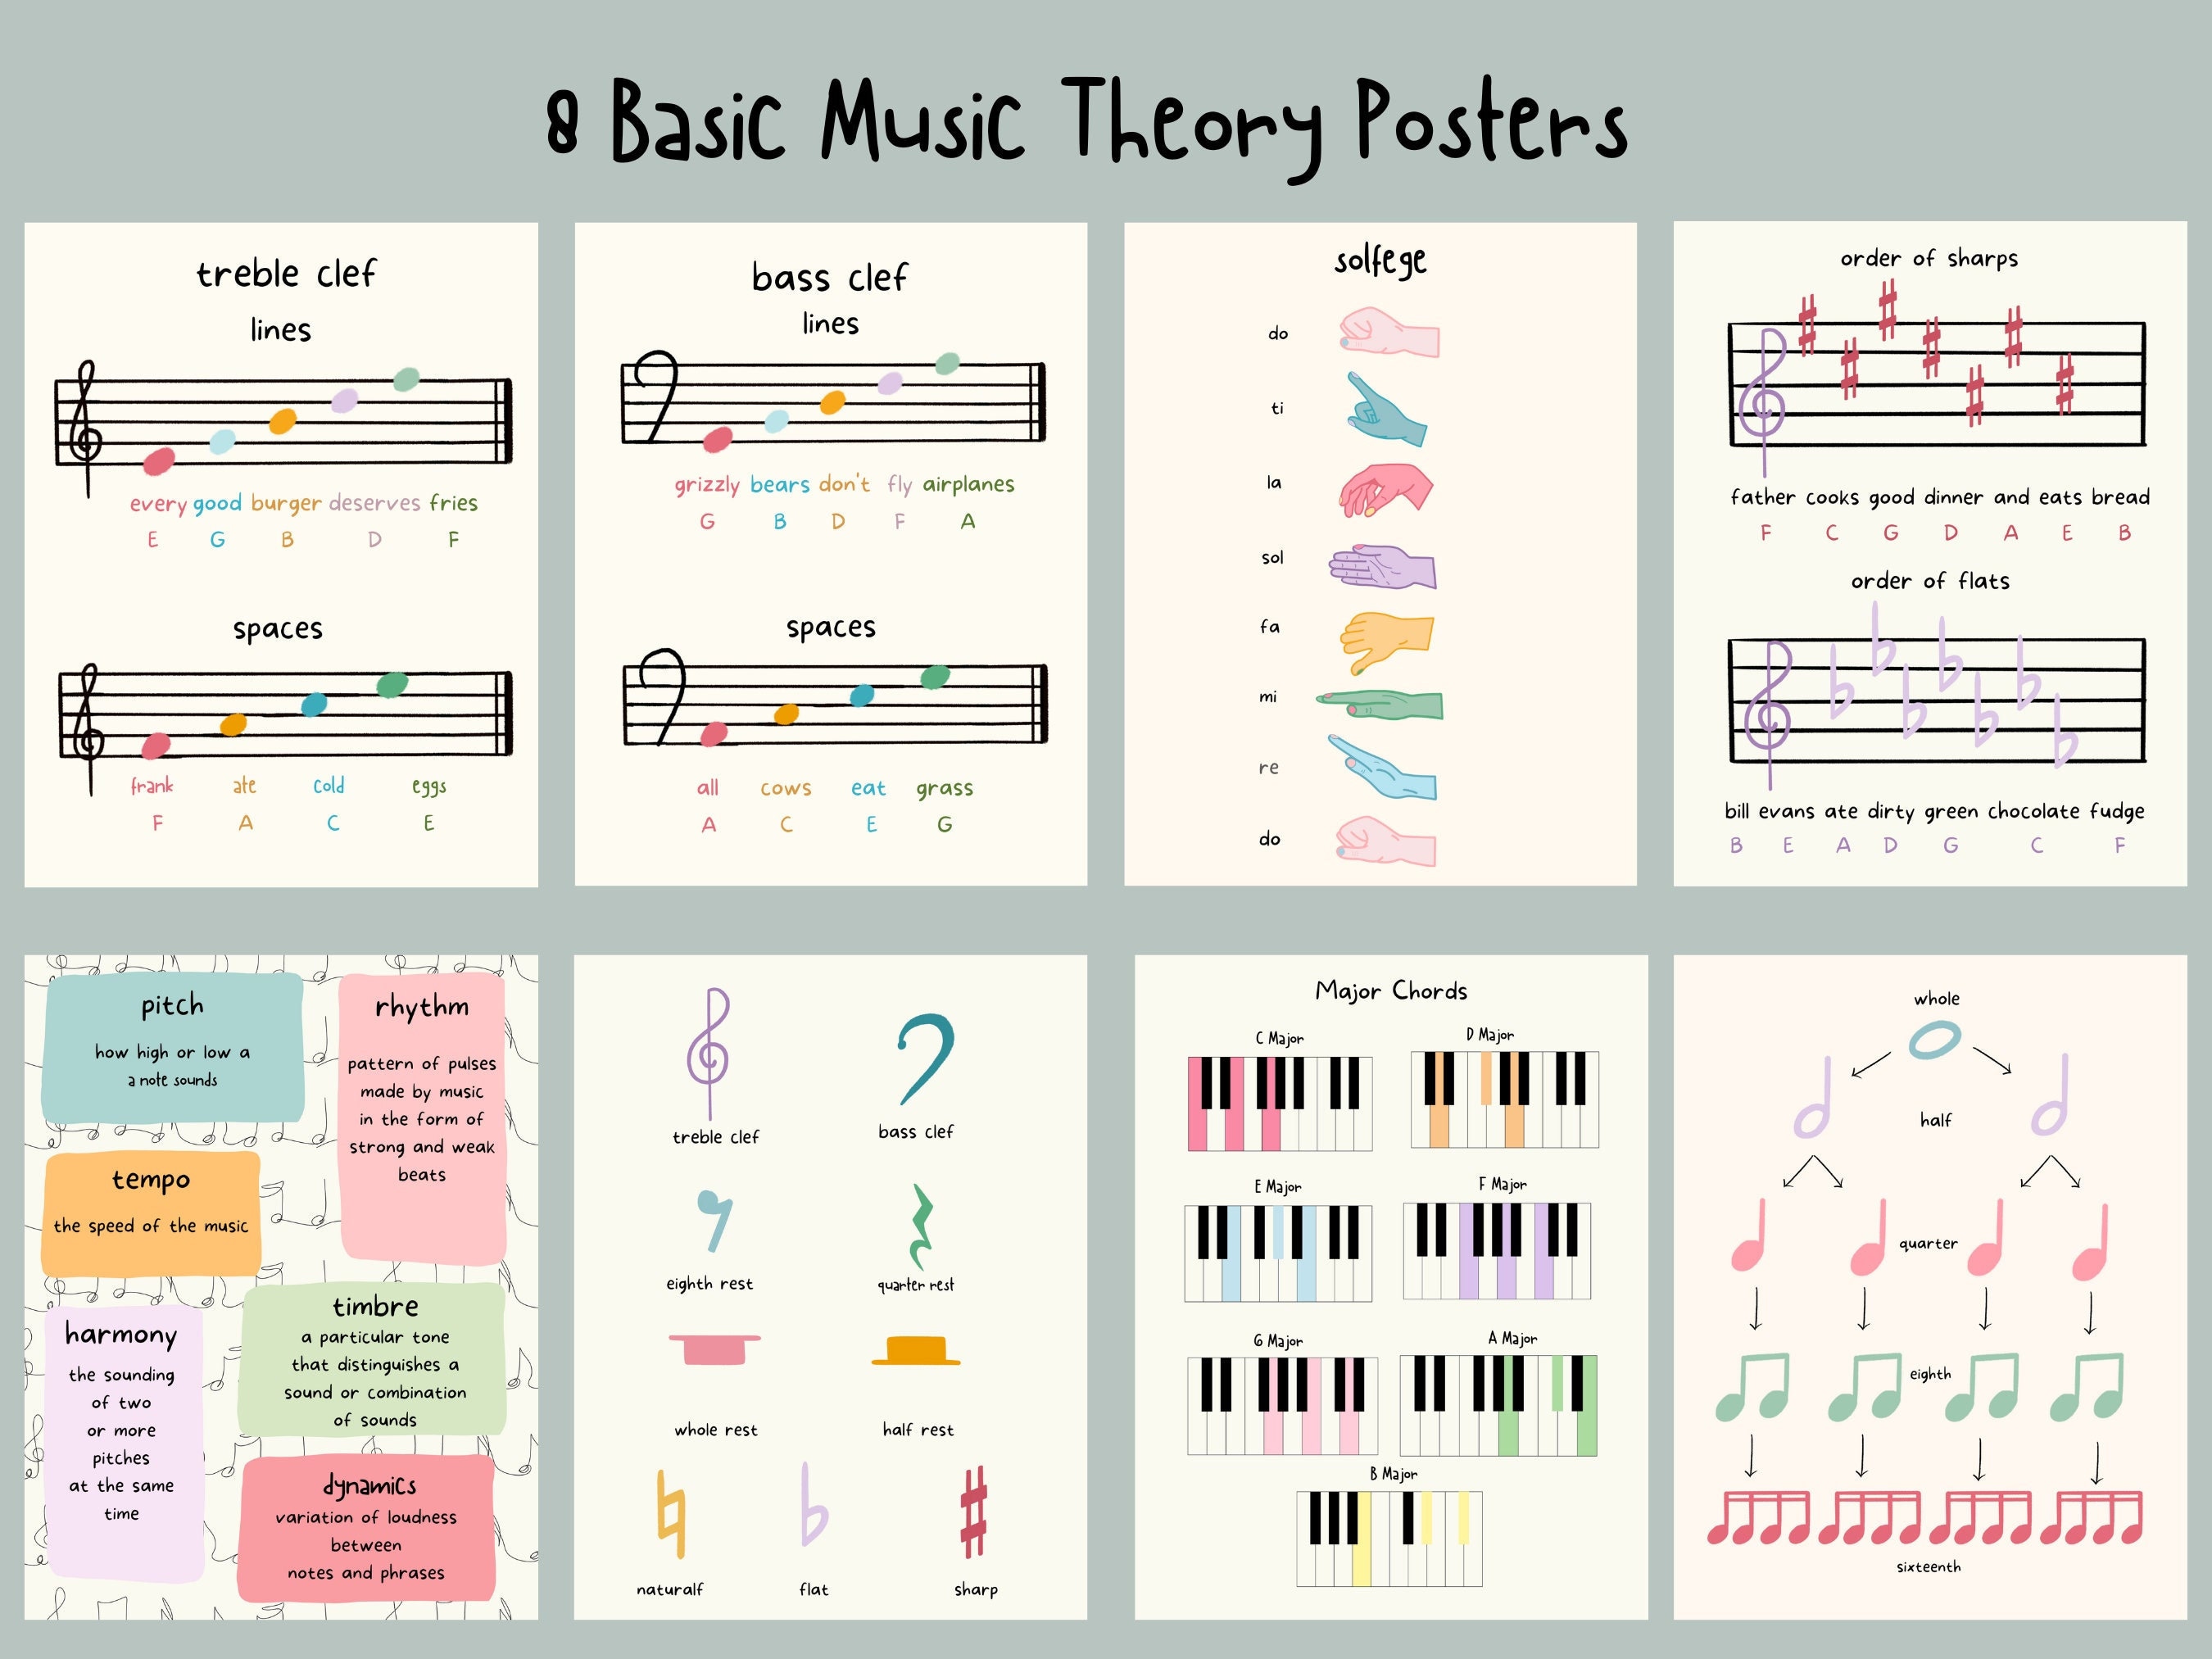 assignment 2.7 music theory